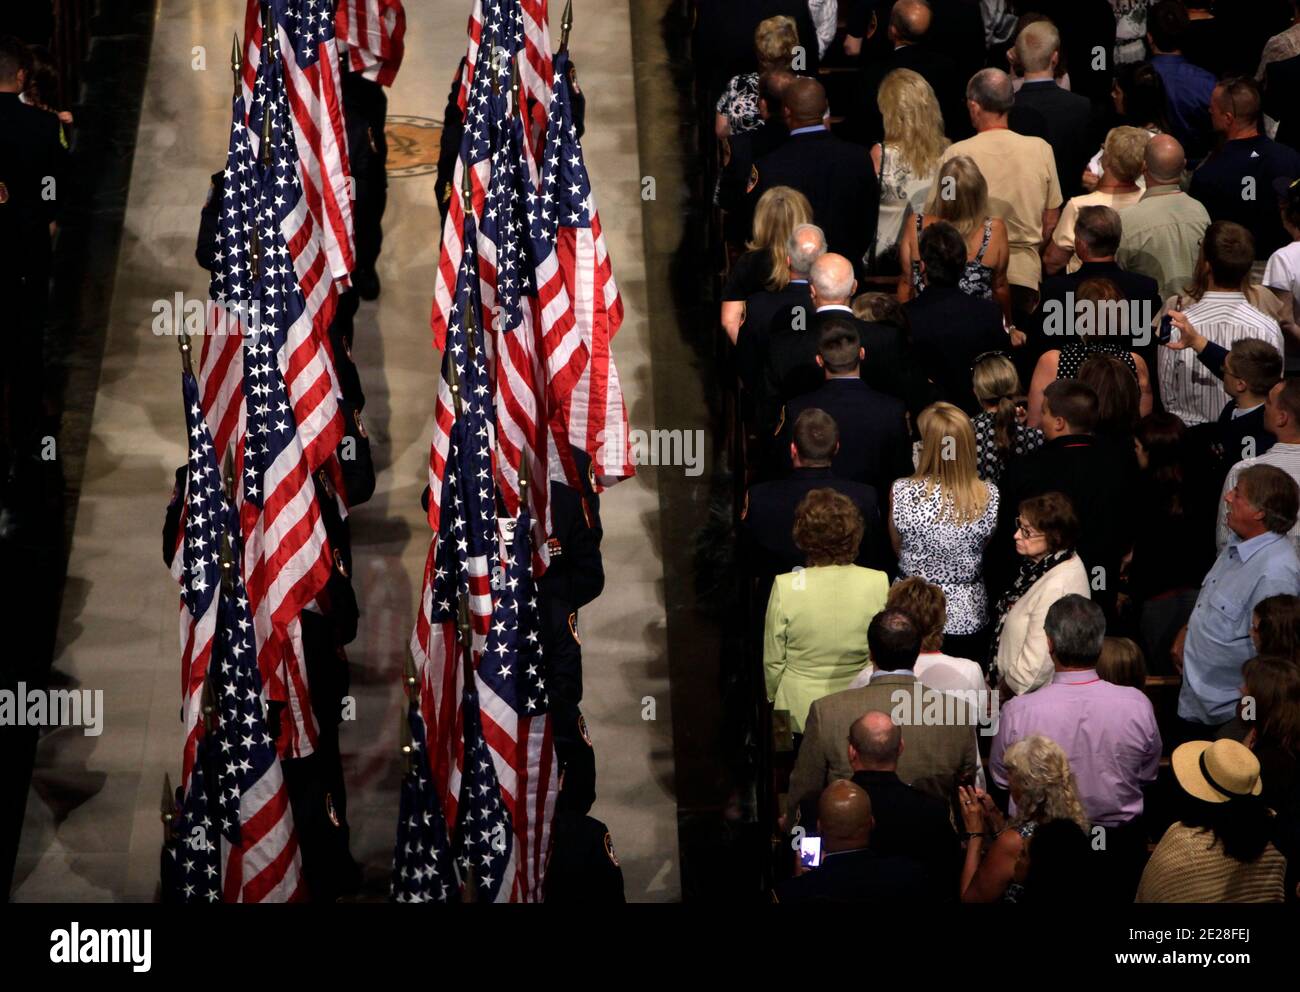 Firefighters leave St. Patrick's Cathedral with American flags in New York Saturday, Sept. 10, 2011, during a ceremony to honor New York firefighters who were killed ten years ago in the attacks on the World Trade Center. (AP Photo/Seth Wenig, Pool) Photo pool/ABACAPRESS.COM Stock Photo